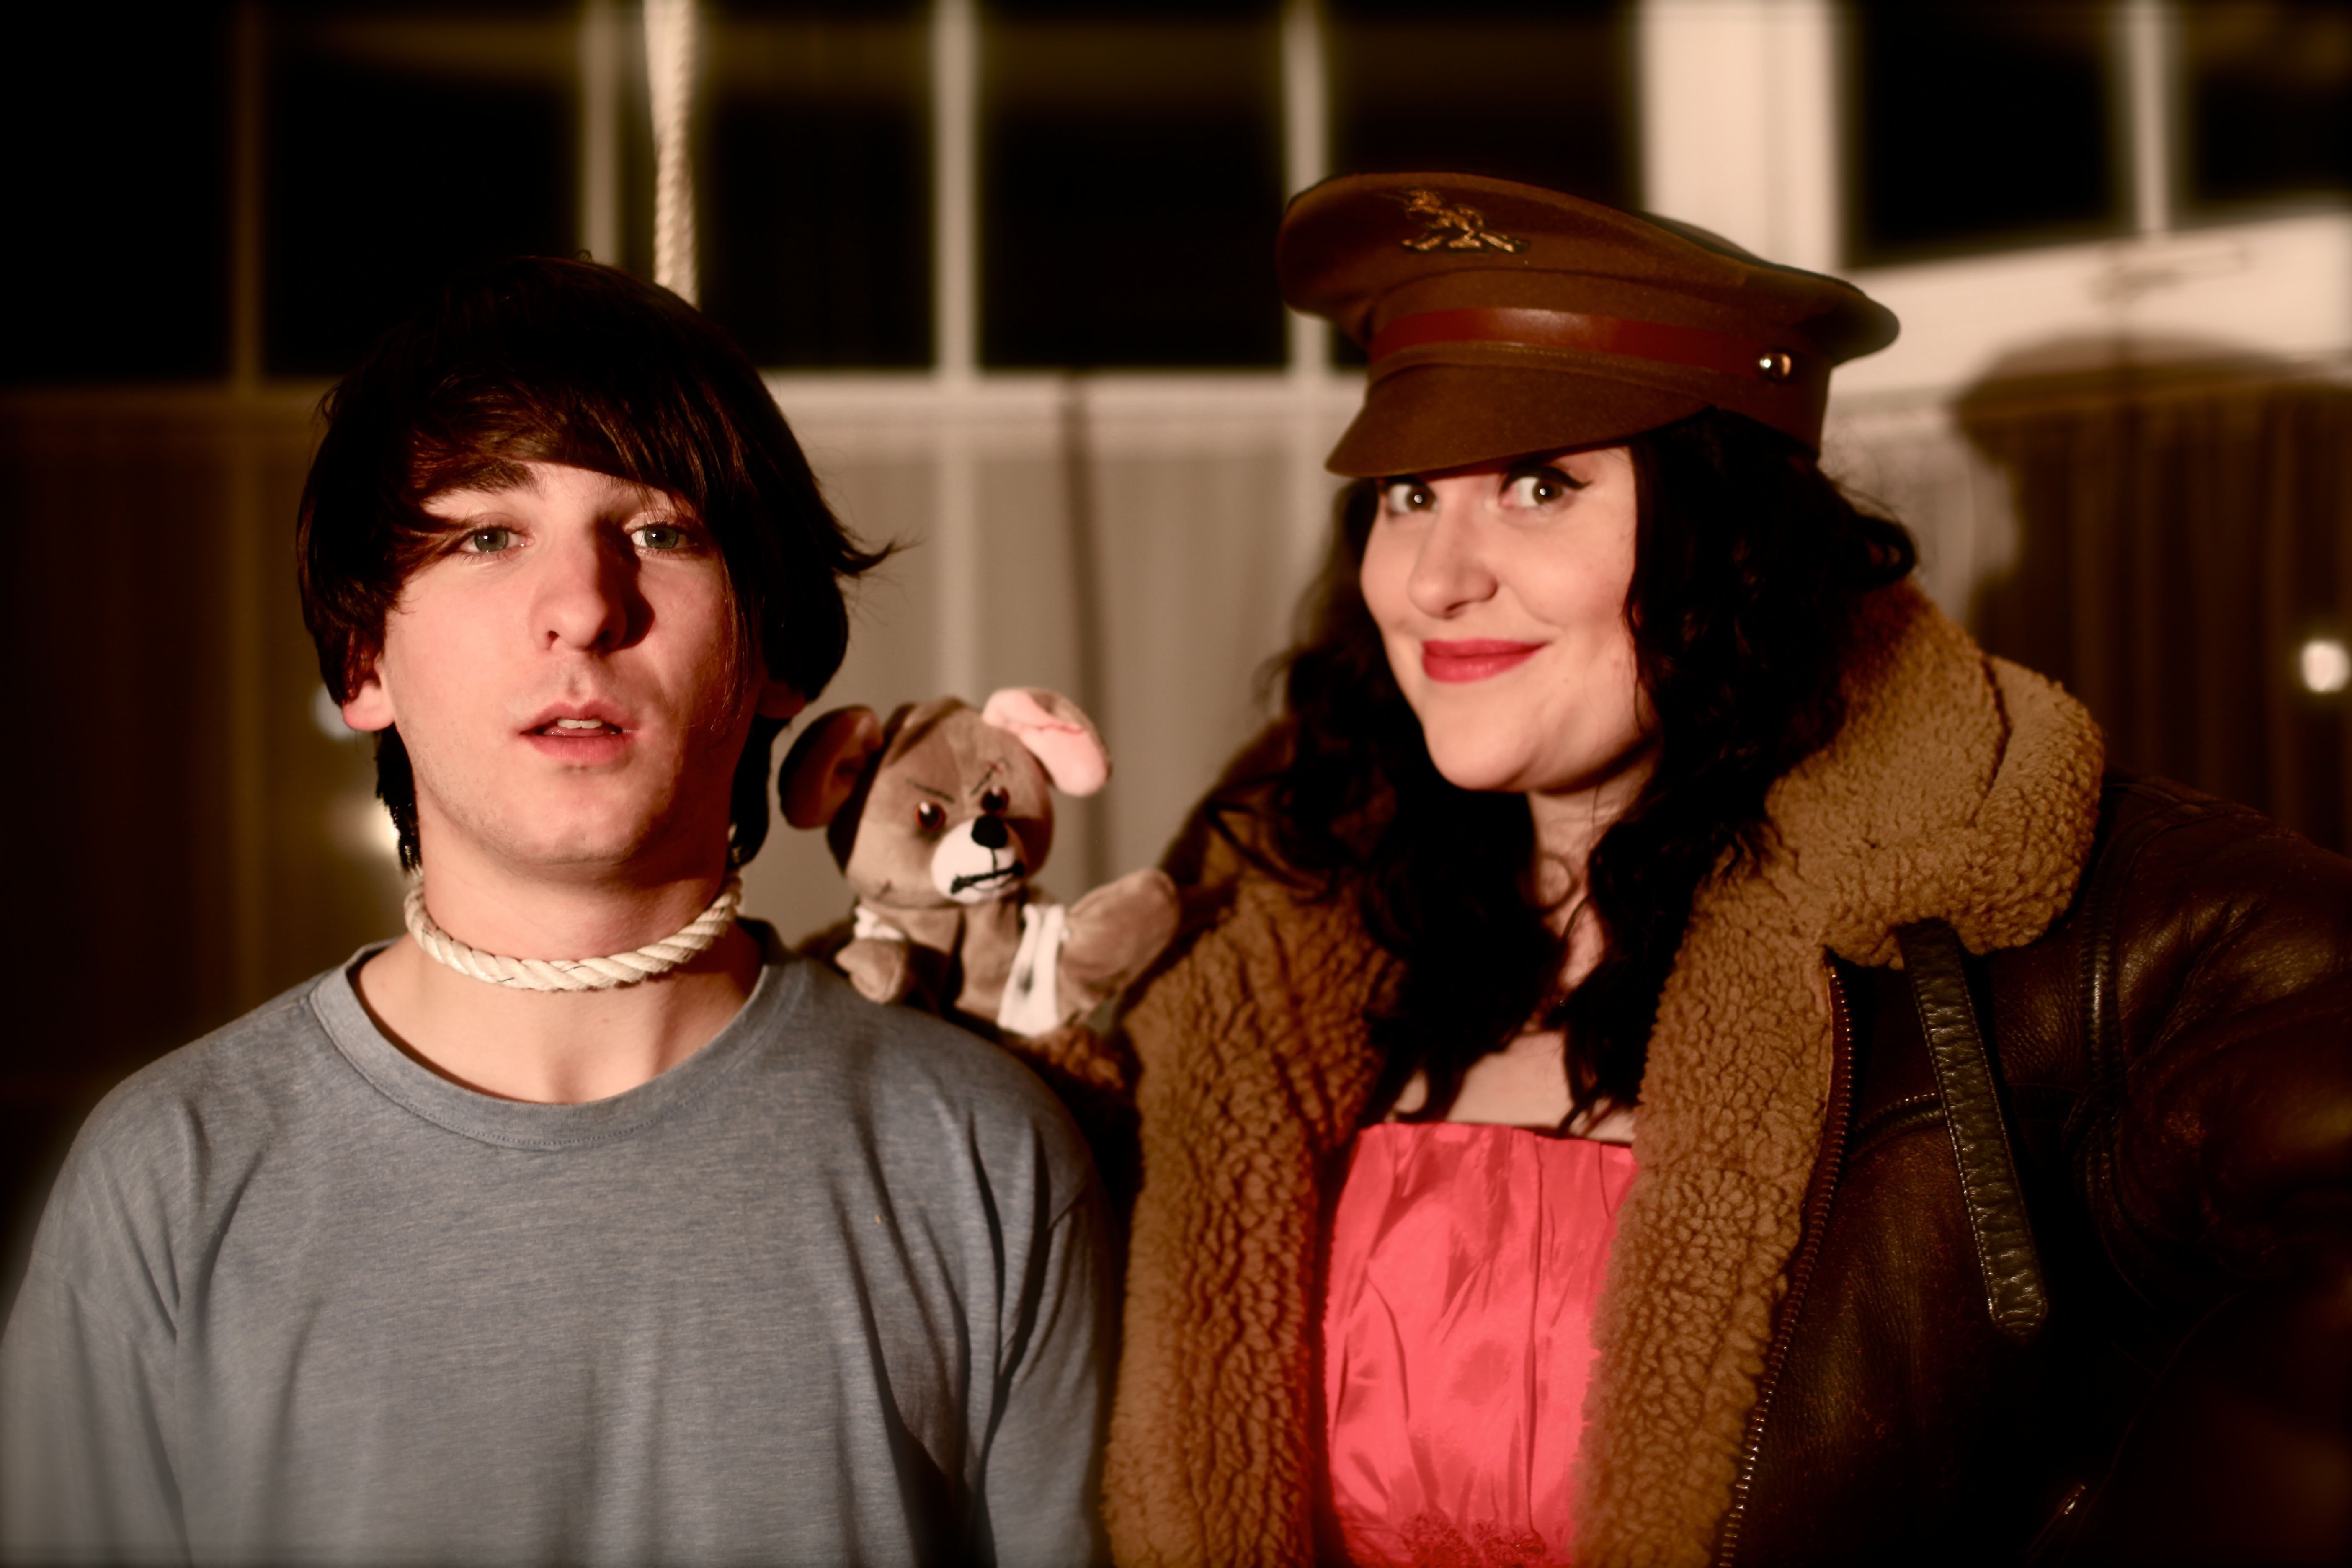 Actor Sam Costelloe and actress Alexandra Lawes with Obscenity Mouse in black comedy A Nice Little Suicide